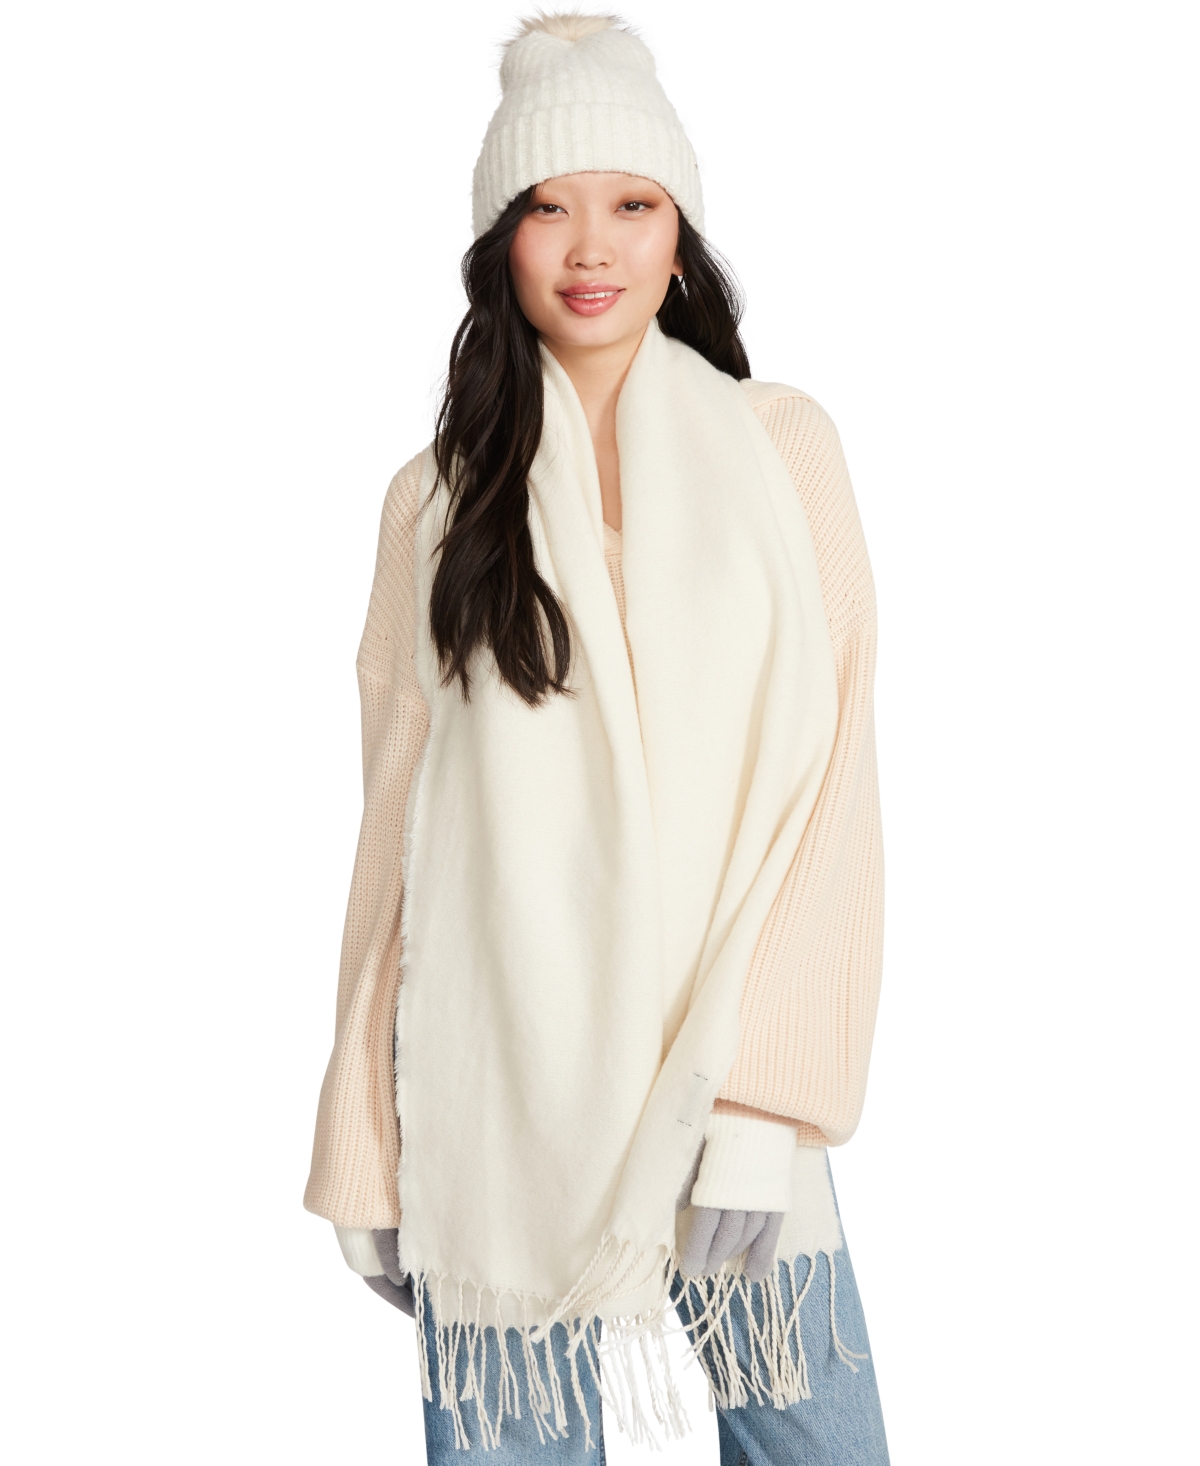 Cozy Blanket Scarf with Fringe Detail - White Solid